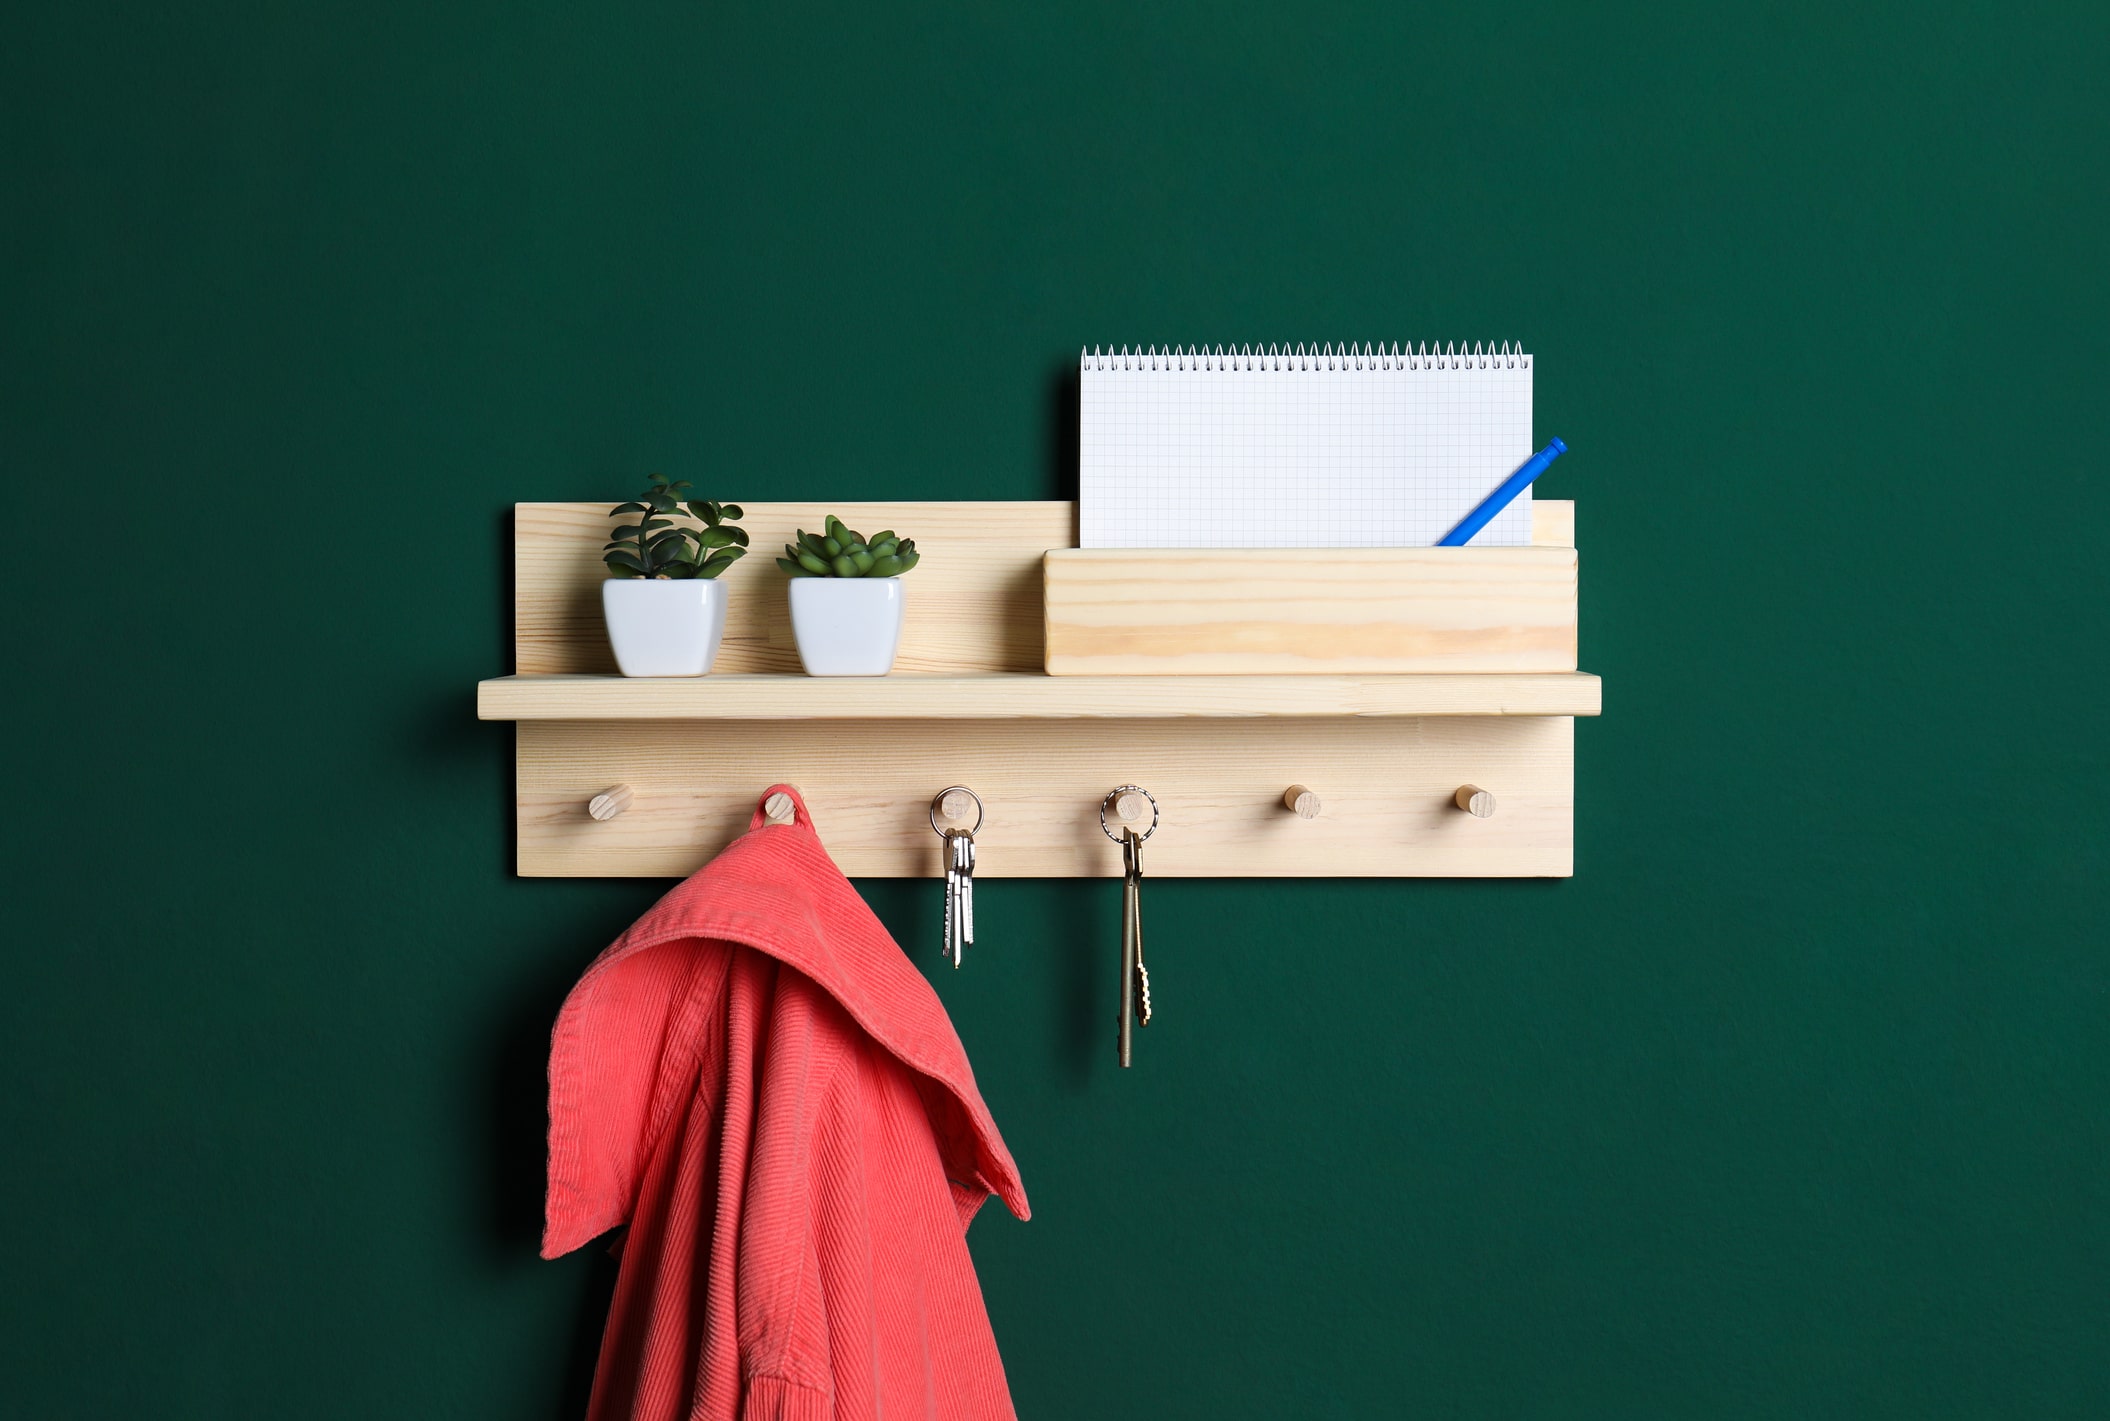 A shelf hung on a green wall with keys and jacket.